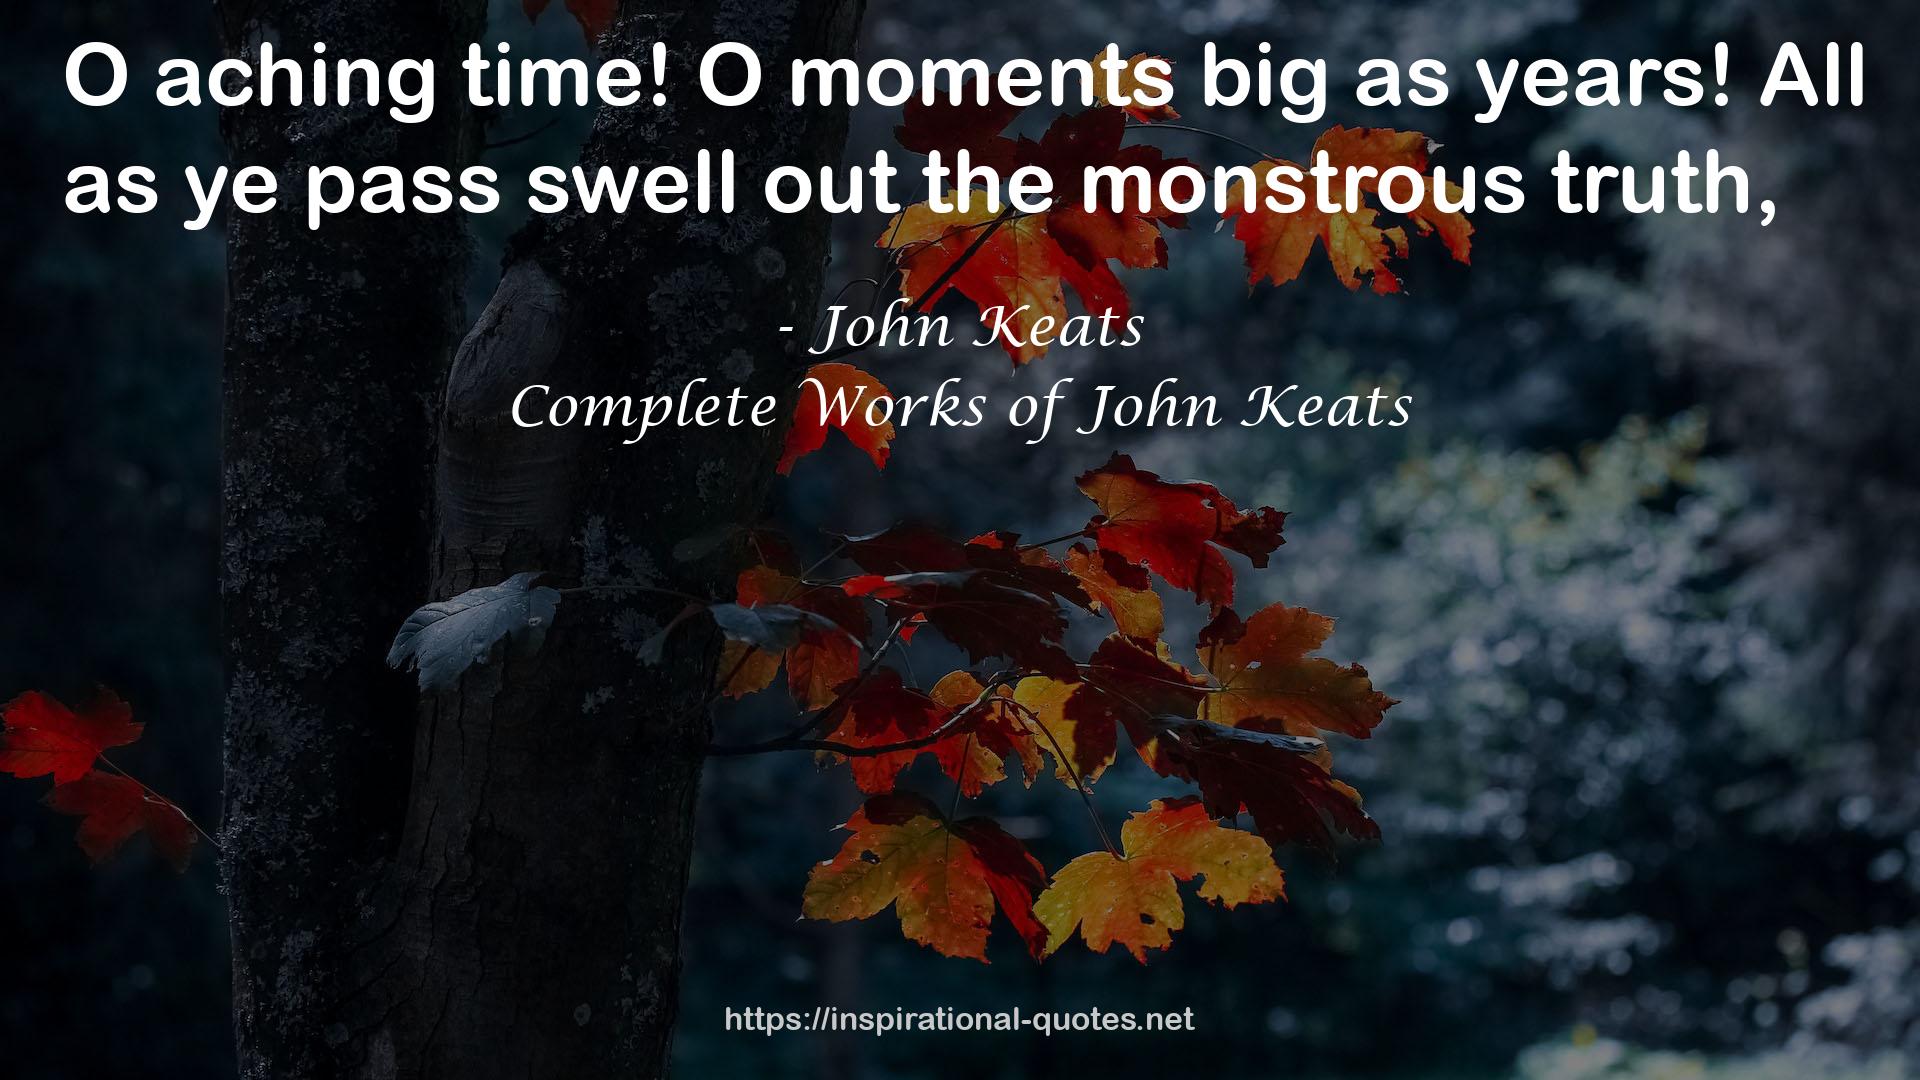 Complete Works of John Keats QUOTES